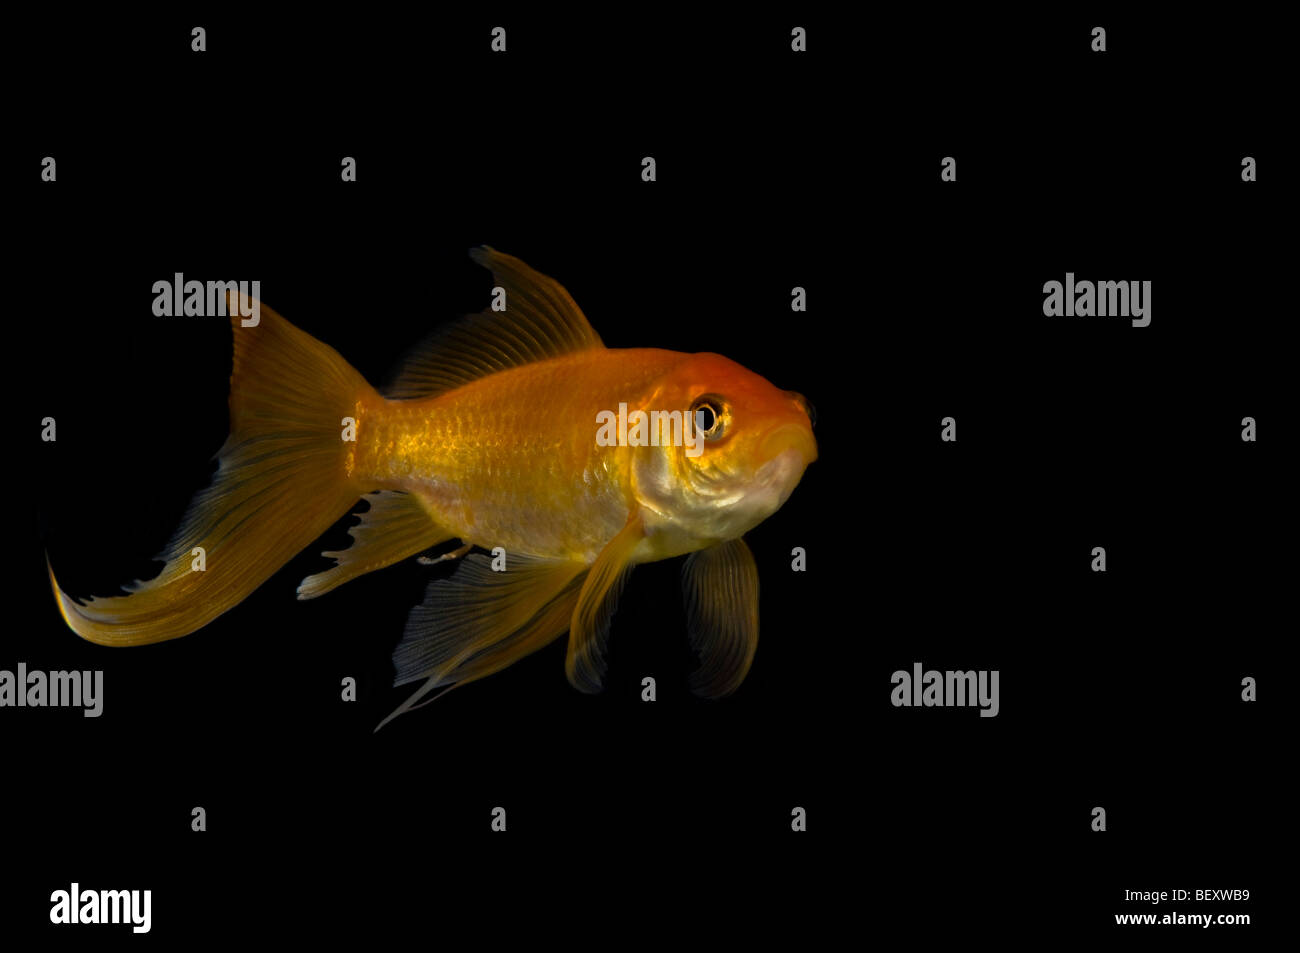 Close up of a single fantail goldfish (Carassius auratus) against a black background. Stock Photo